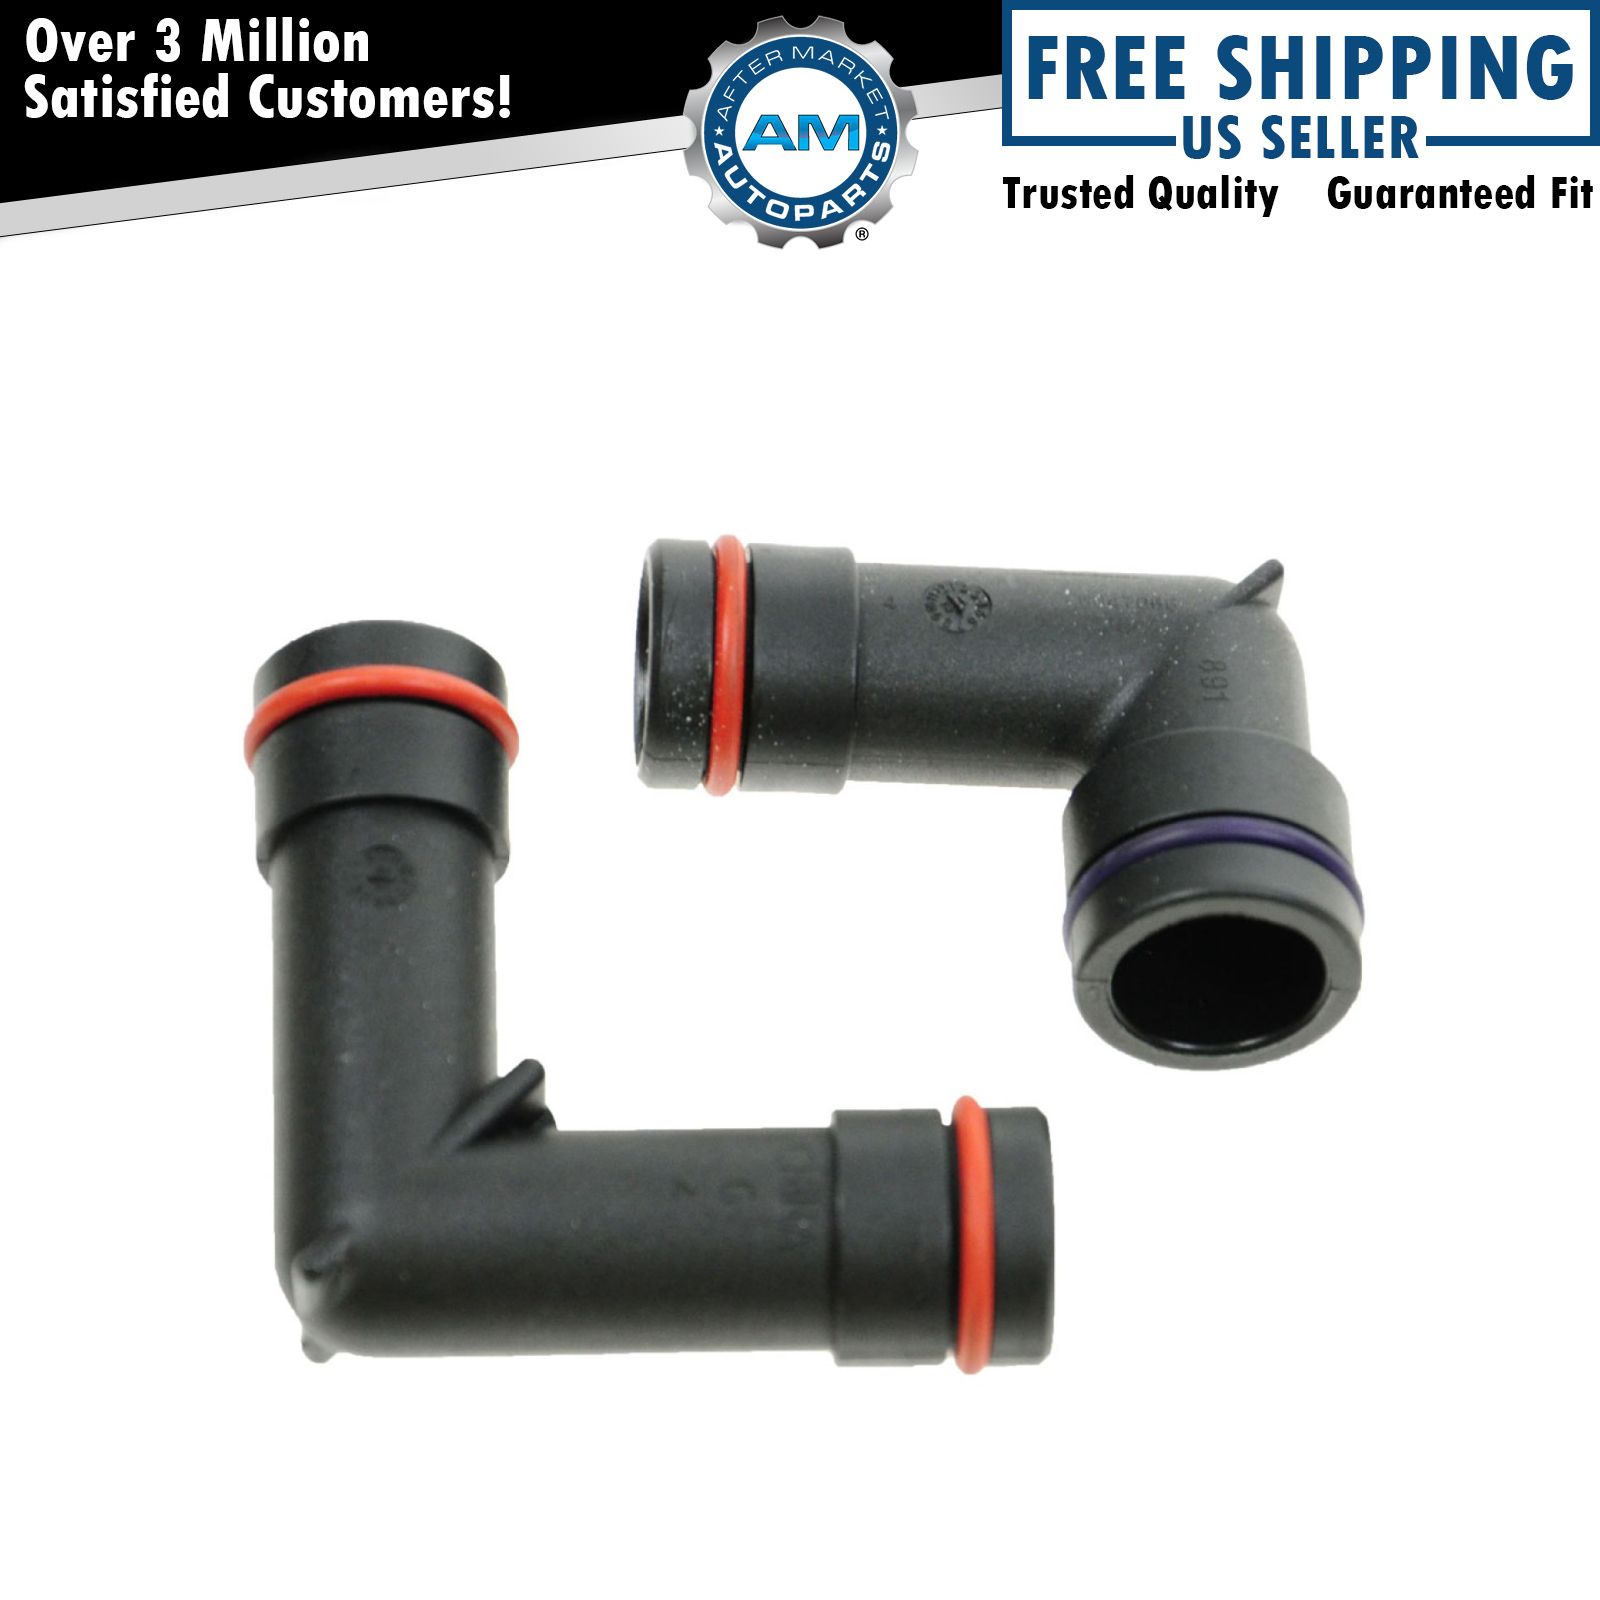 Dorman Heater Hose Elbow Connectors Upper Lower Pair for GM Chevy Buick 3.8L V6